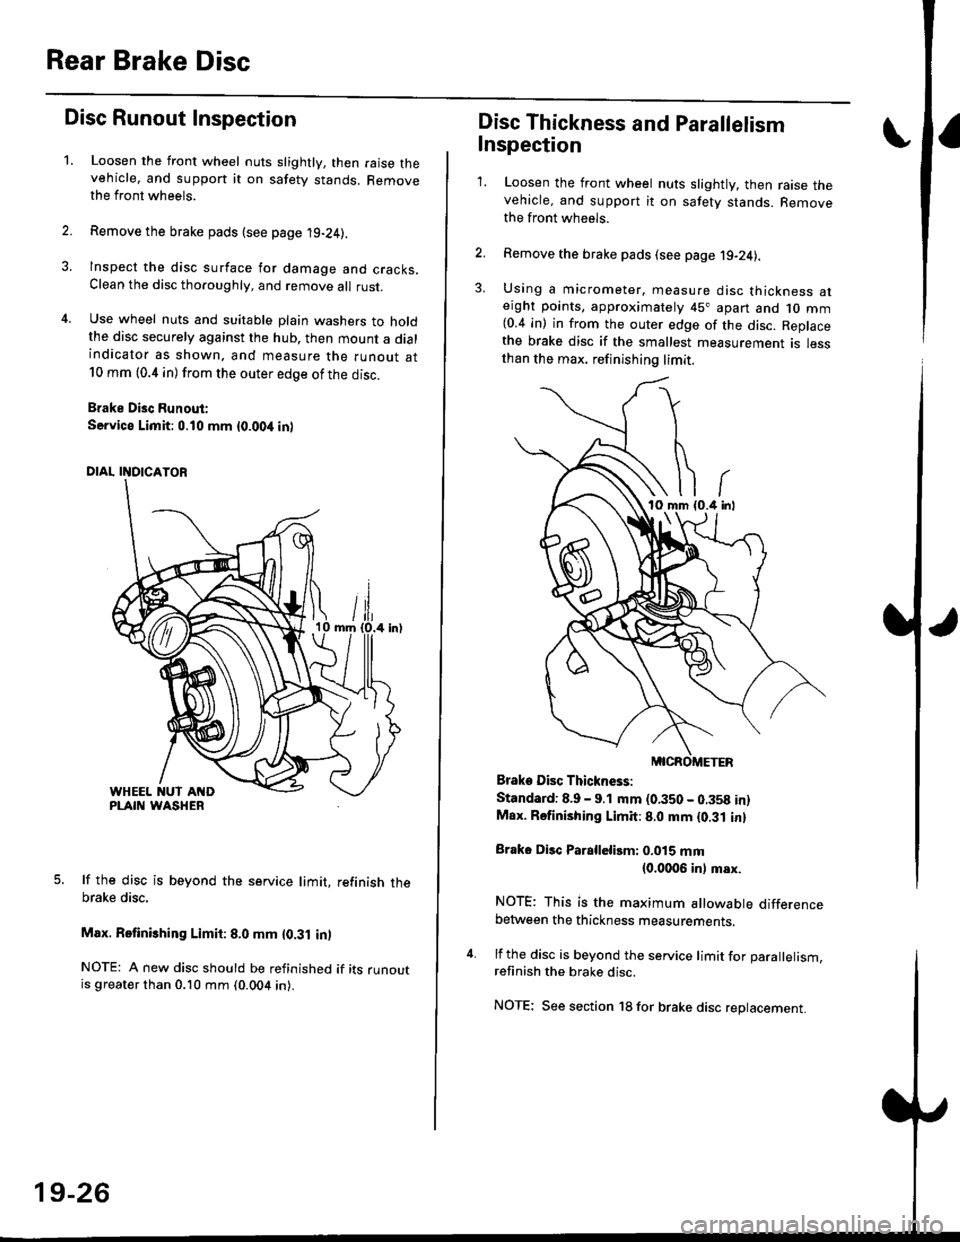 HONDA CIVIC 1999 6.G Owners Manual Rear Brake Disc
Disc Runout Inspection
1.Loosen the front wheel nuts slightly, then raise thevehicle, and suppon it on safety stands. Removethe front wheels.
Remove the brake pads (see page 19-24).
In